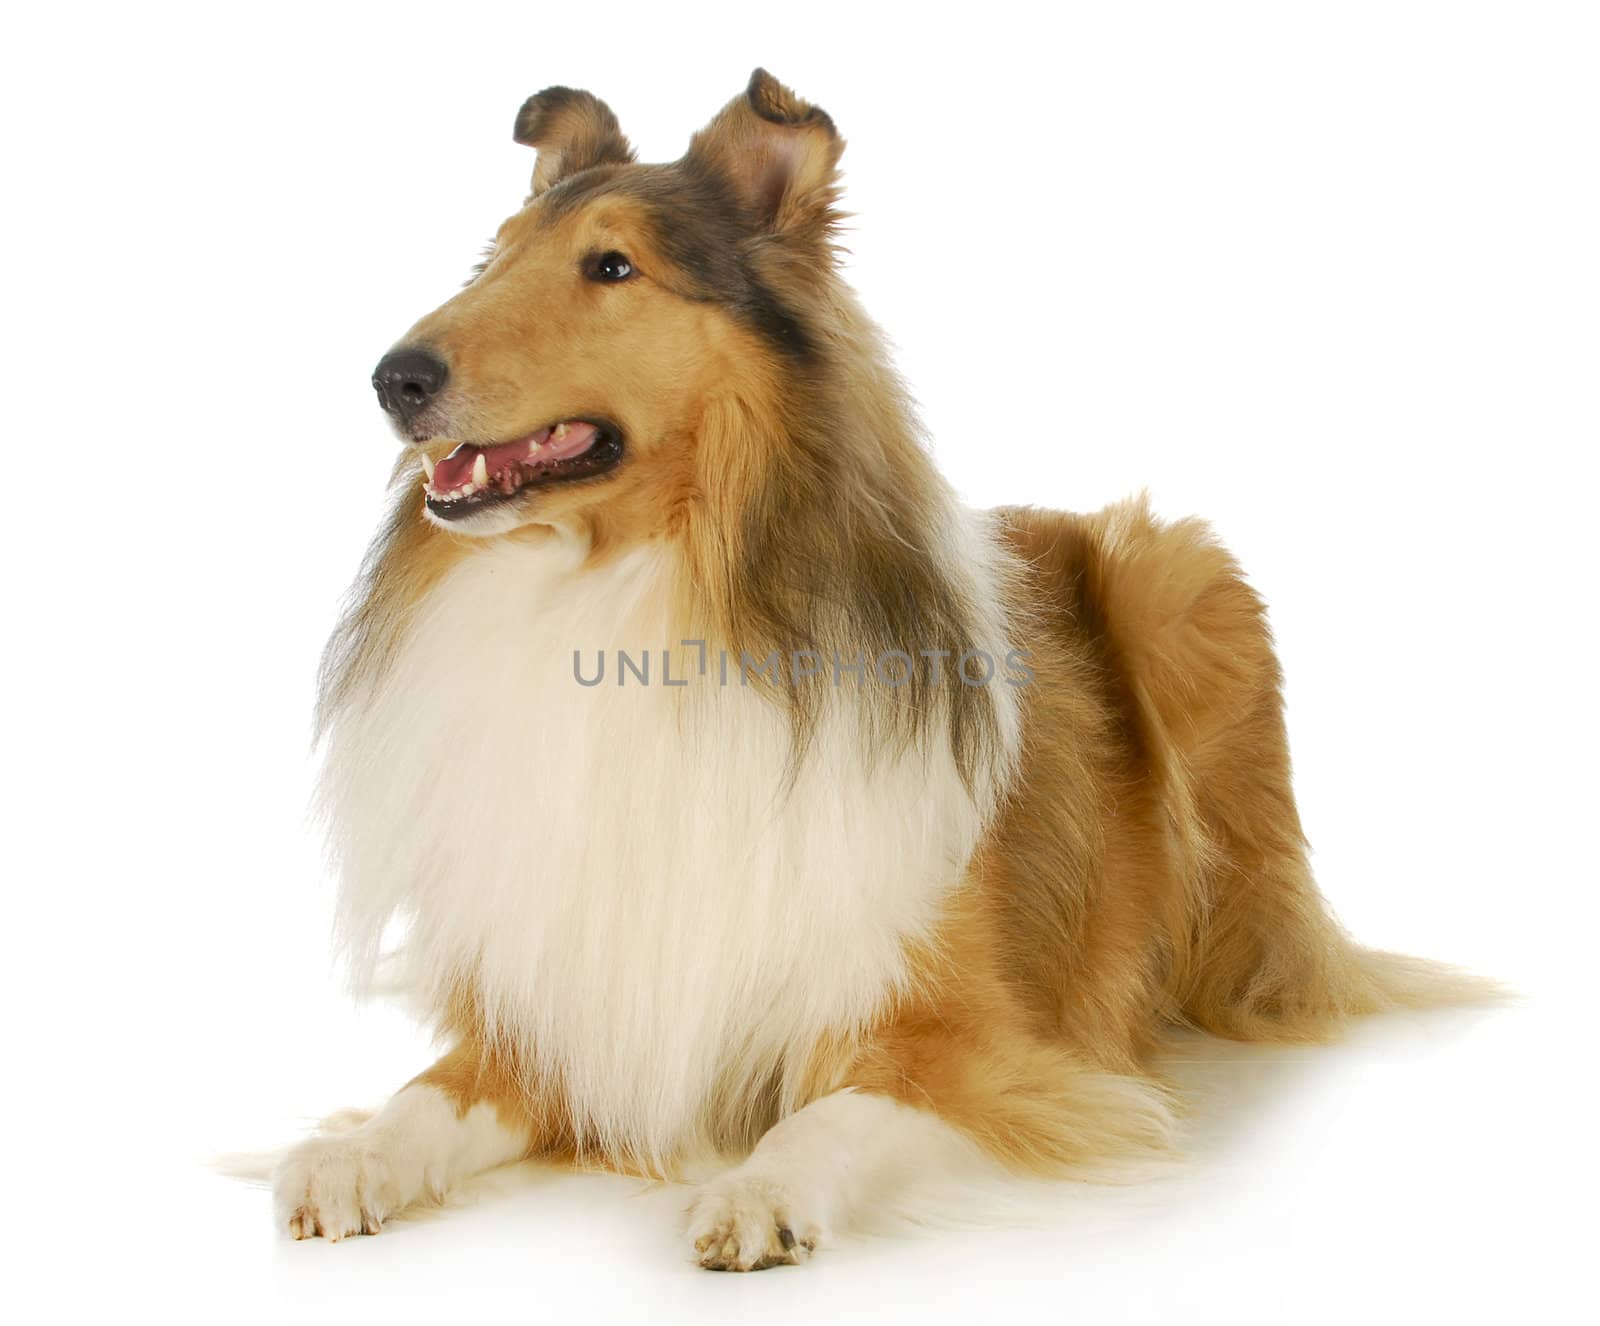 collie - rough coated collie laying down looking up isolated on white background